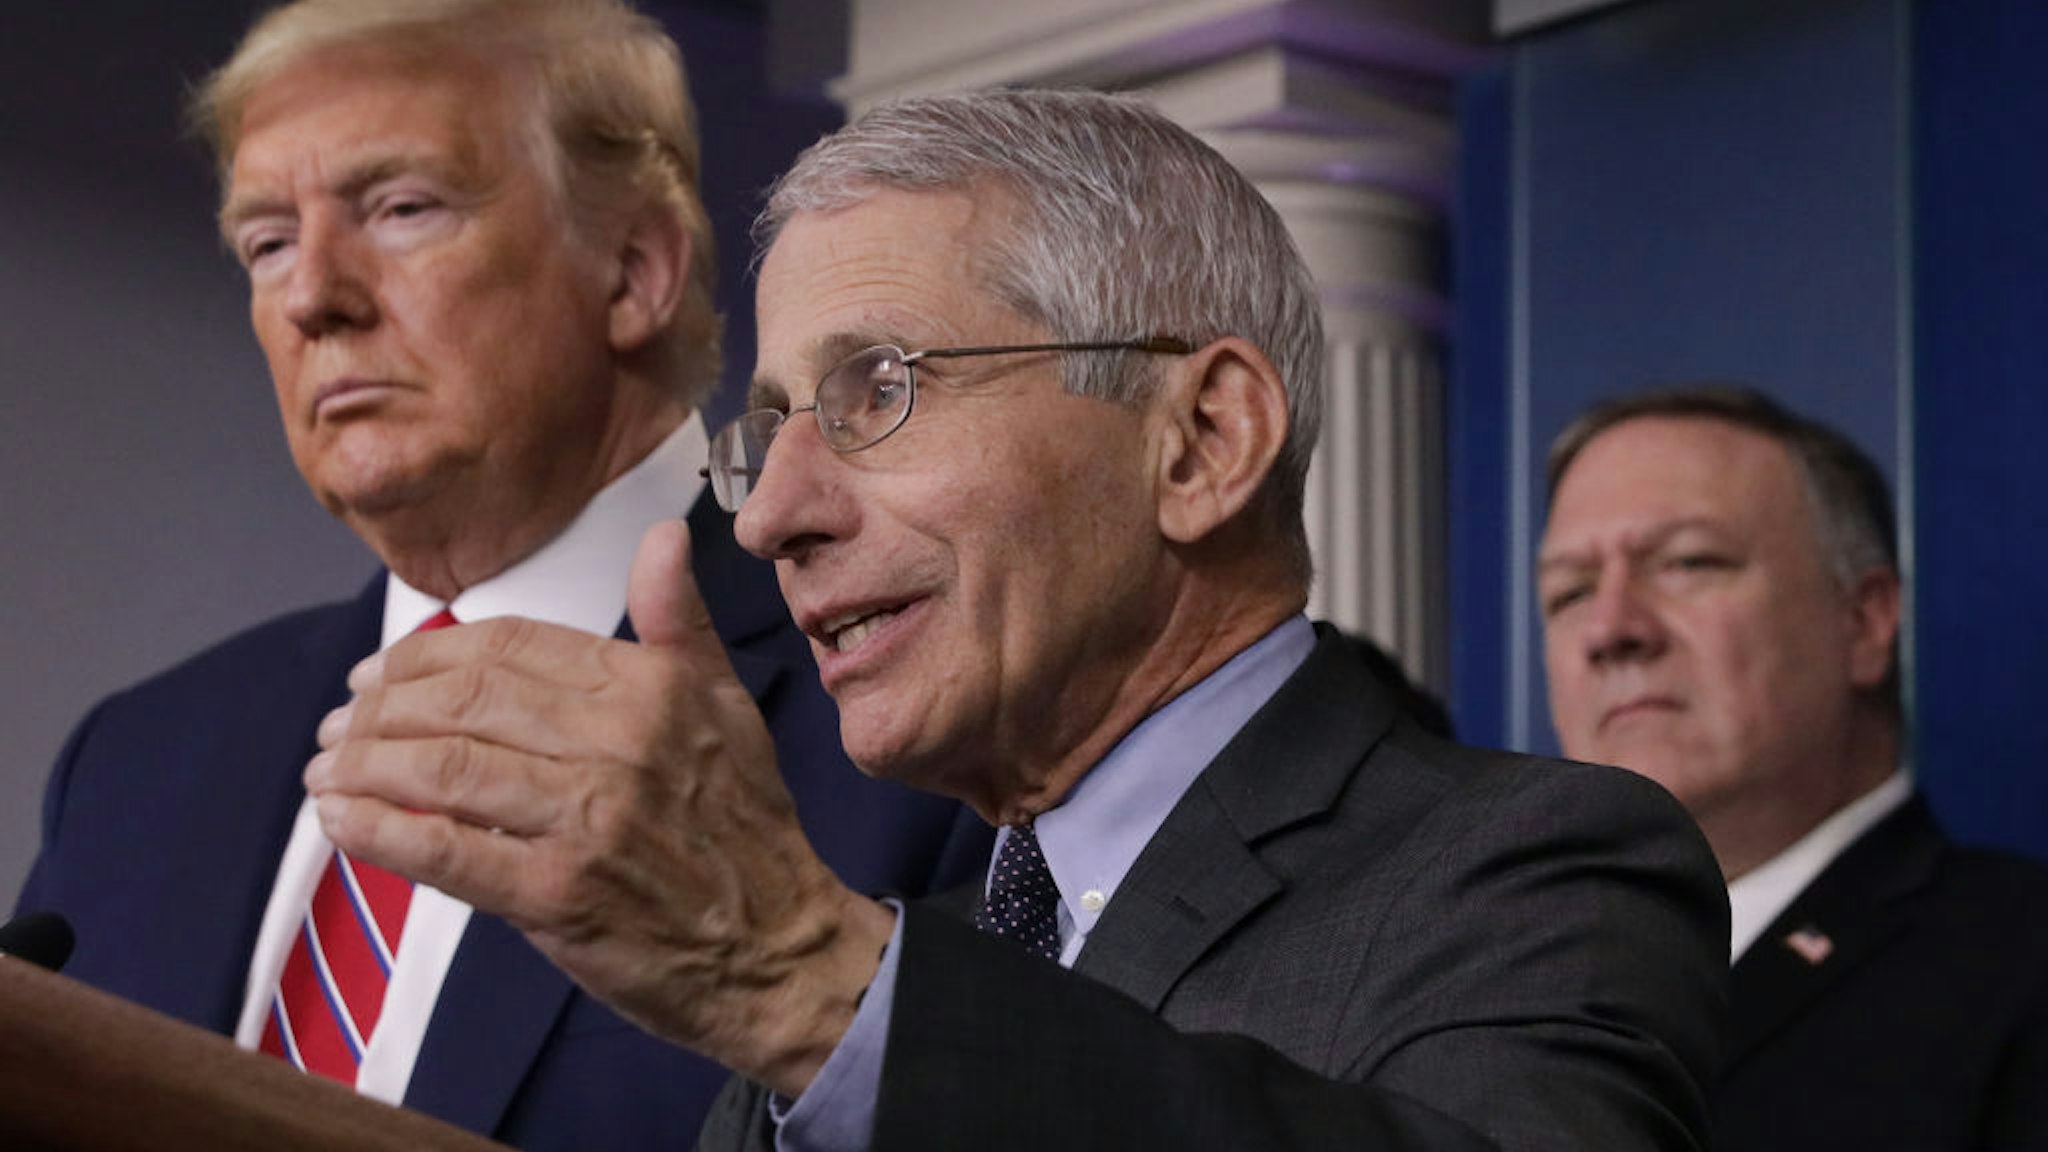 Dr. Anthony Fauci (C) director of the National Institute of Allergy and Infectious Diseases speaks while U.S. President Donald Trump (L) and Secretary of State Mike Pompeo (R) listen during a briefing on the latest development of the coronavirus outbreak in the U.S. in the James Brady Press Briefing Room at the White House March 20, 2020 in Washington, DC. With deaths caused by the coronavirus rising and foreseeable economic turmoil, the Senate is working on legislation for a $1 trillion aid package to deal with the COVID-19 pandemic. President Trump announced that¬†tax day will be delayed from April 15 to July 15. (Photo by Alex Wong/Getty Images)